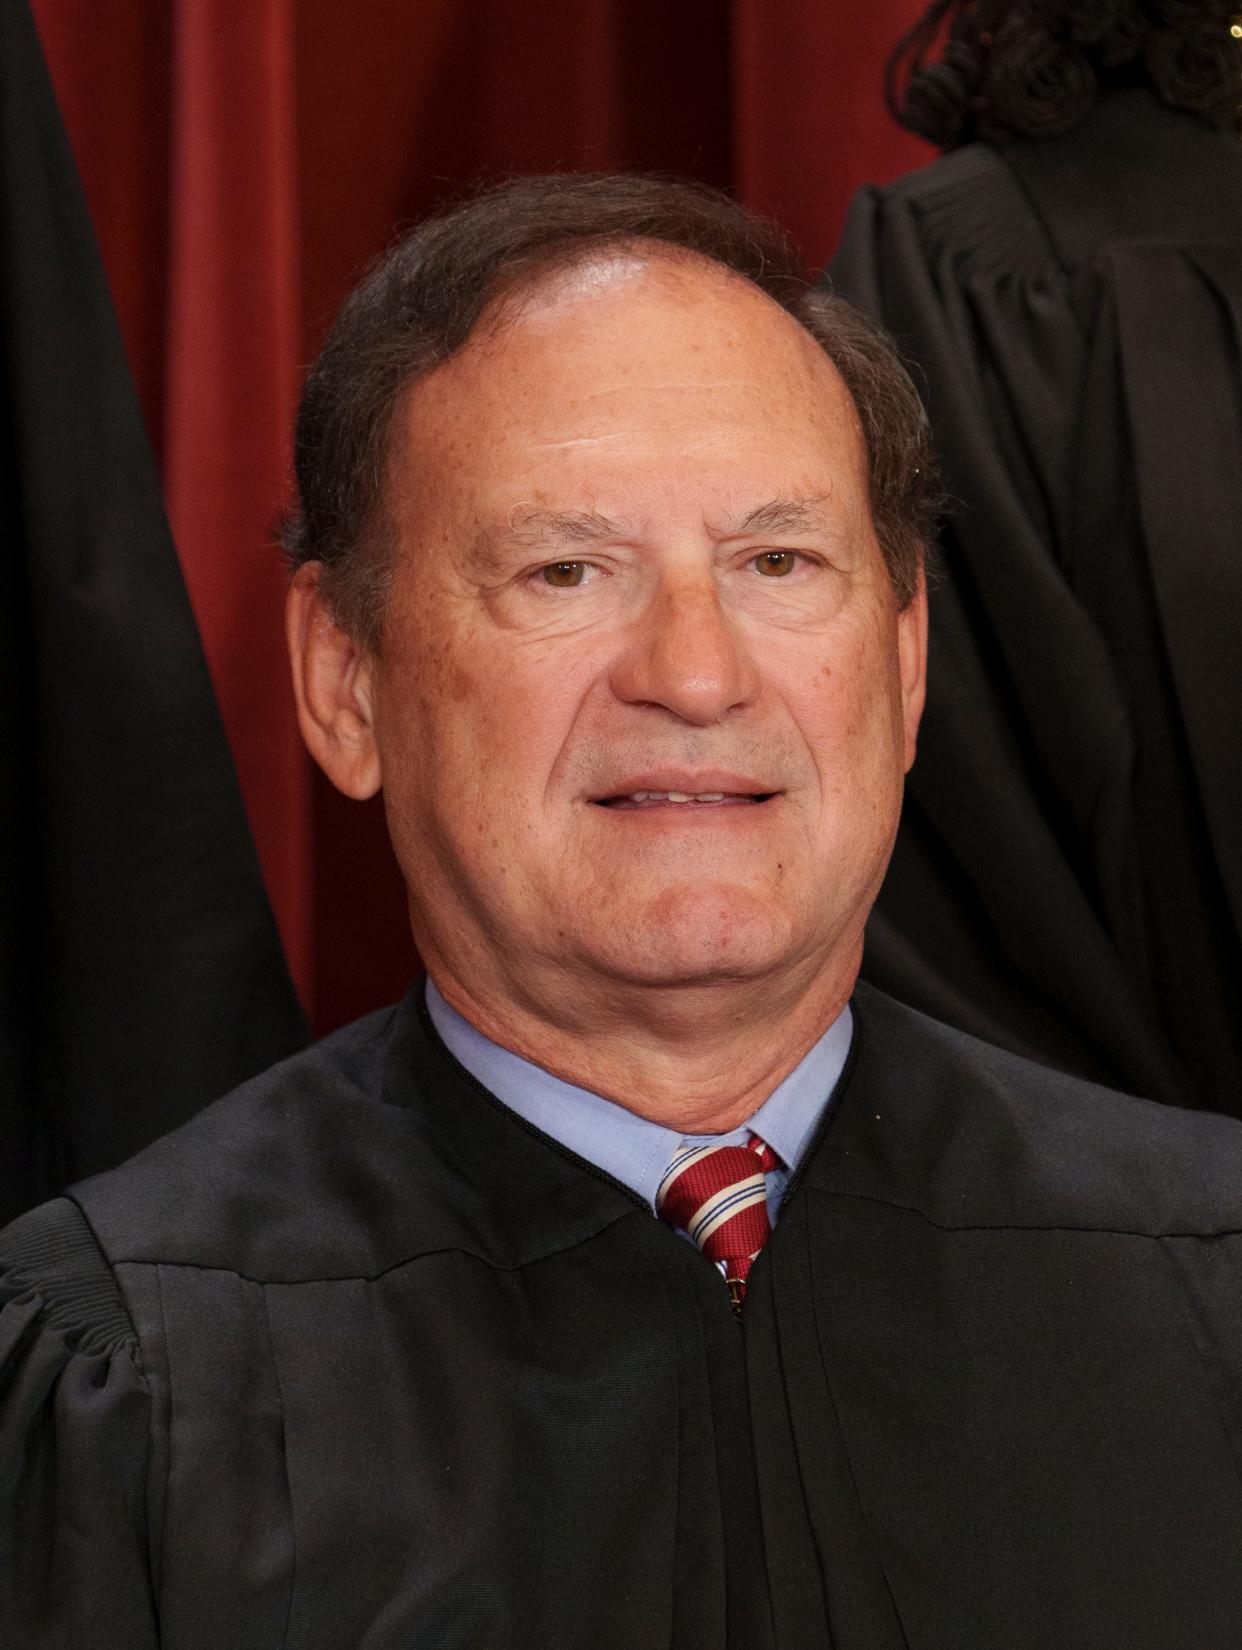 Justice Samuel Alito asked if former presidents should be left to the mercy of prosecutors.